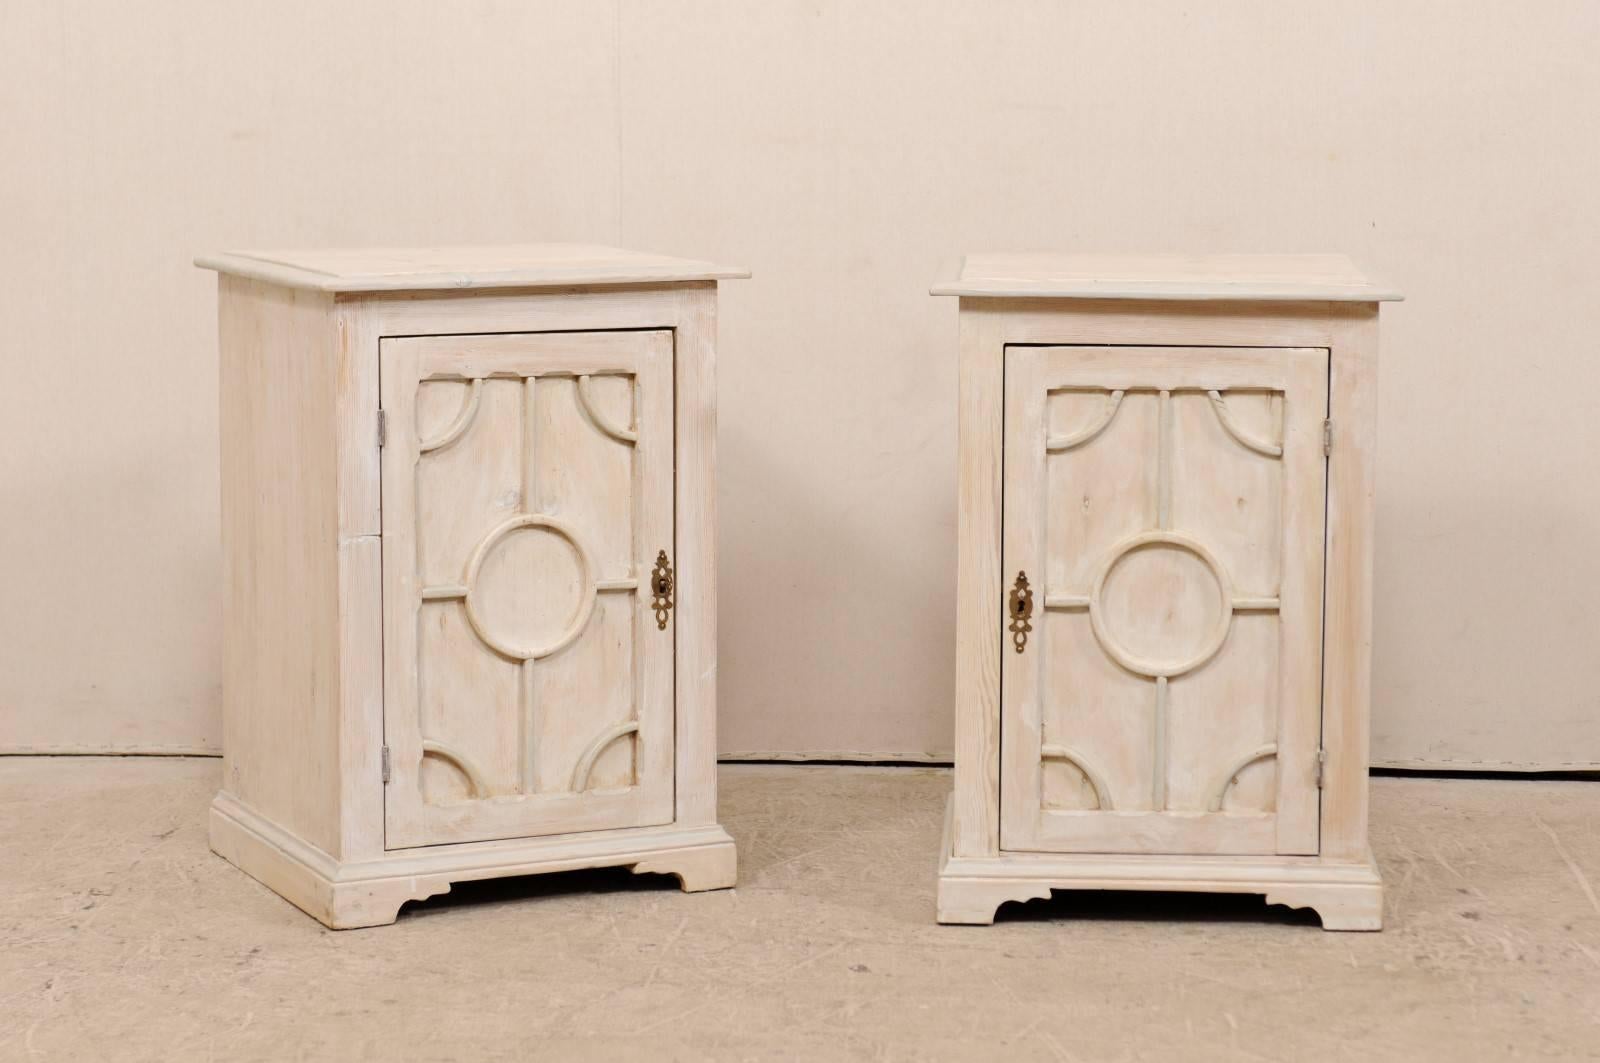 A pair of English painted wood side chests or tables from the mid-20th century. This pair of midcentury side cabinets features a recessed panel single door which has raised geometrically designed trim details, emphasized with a circle at their